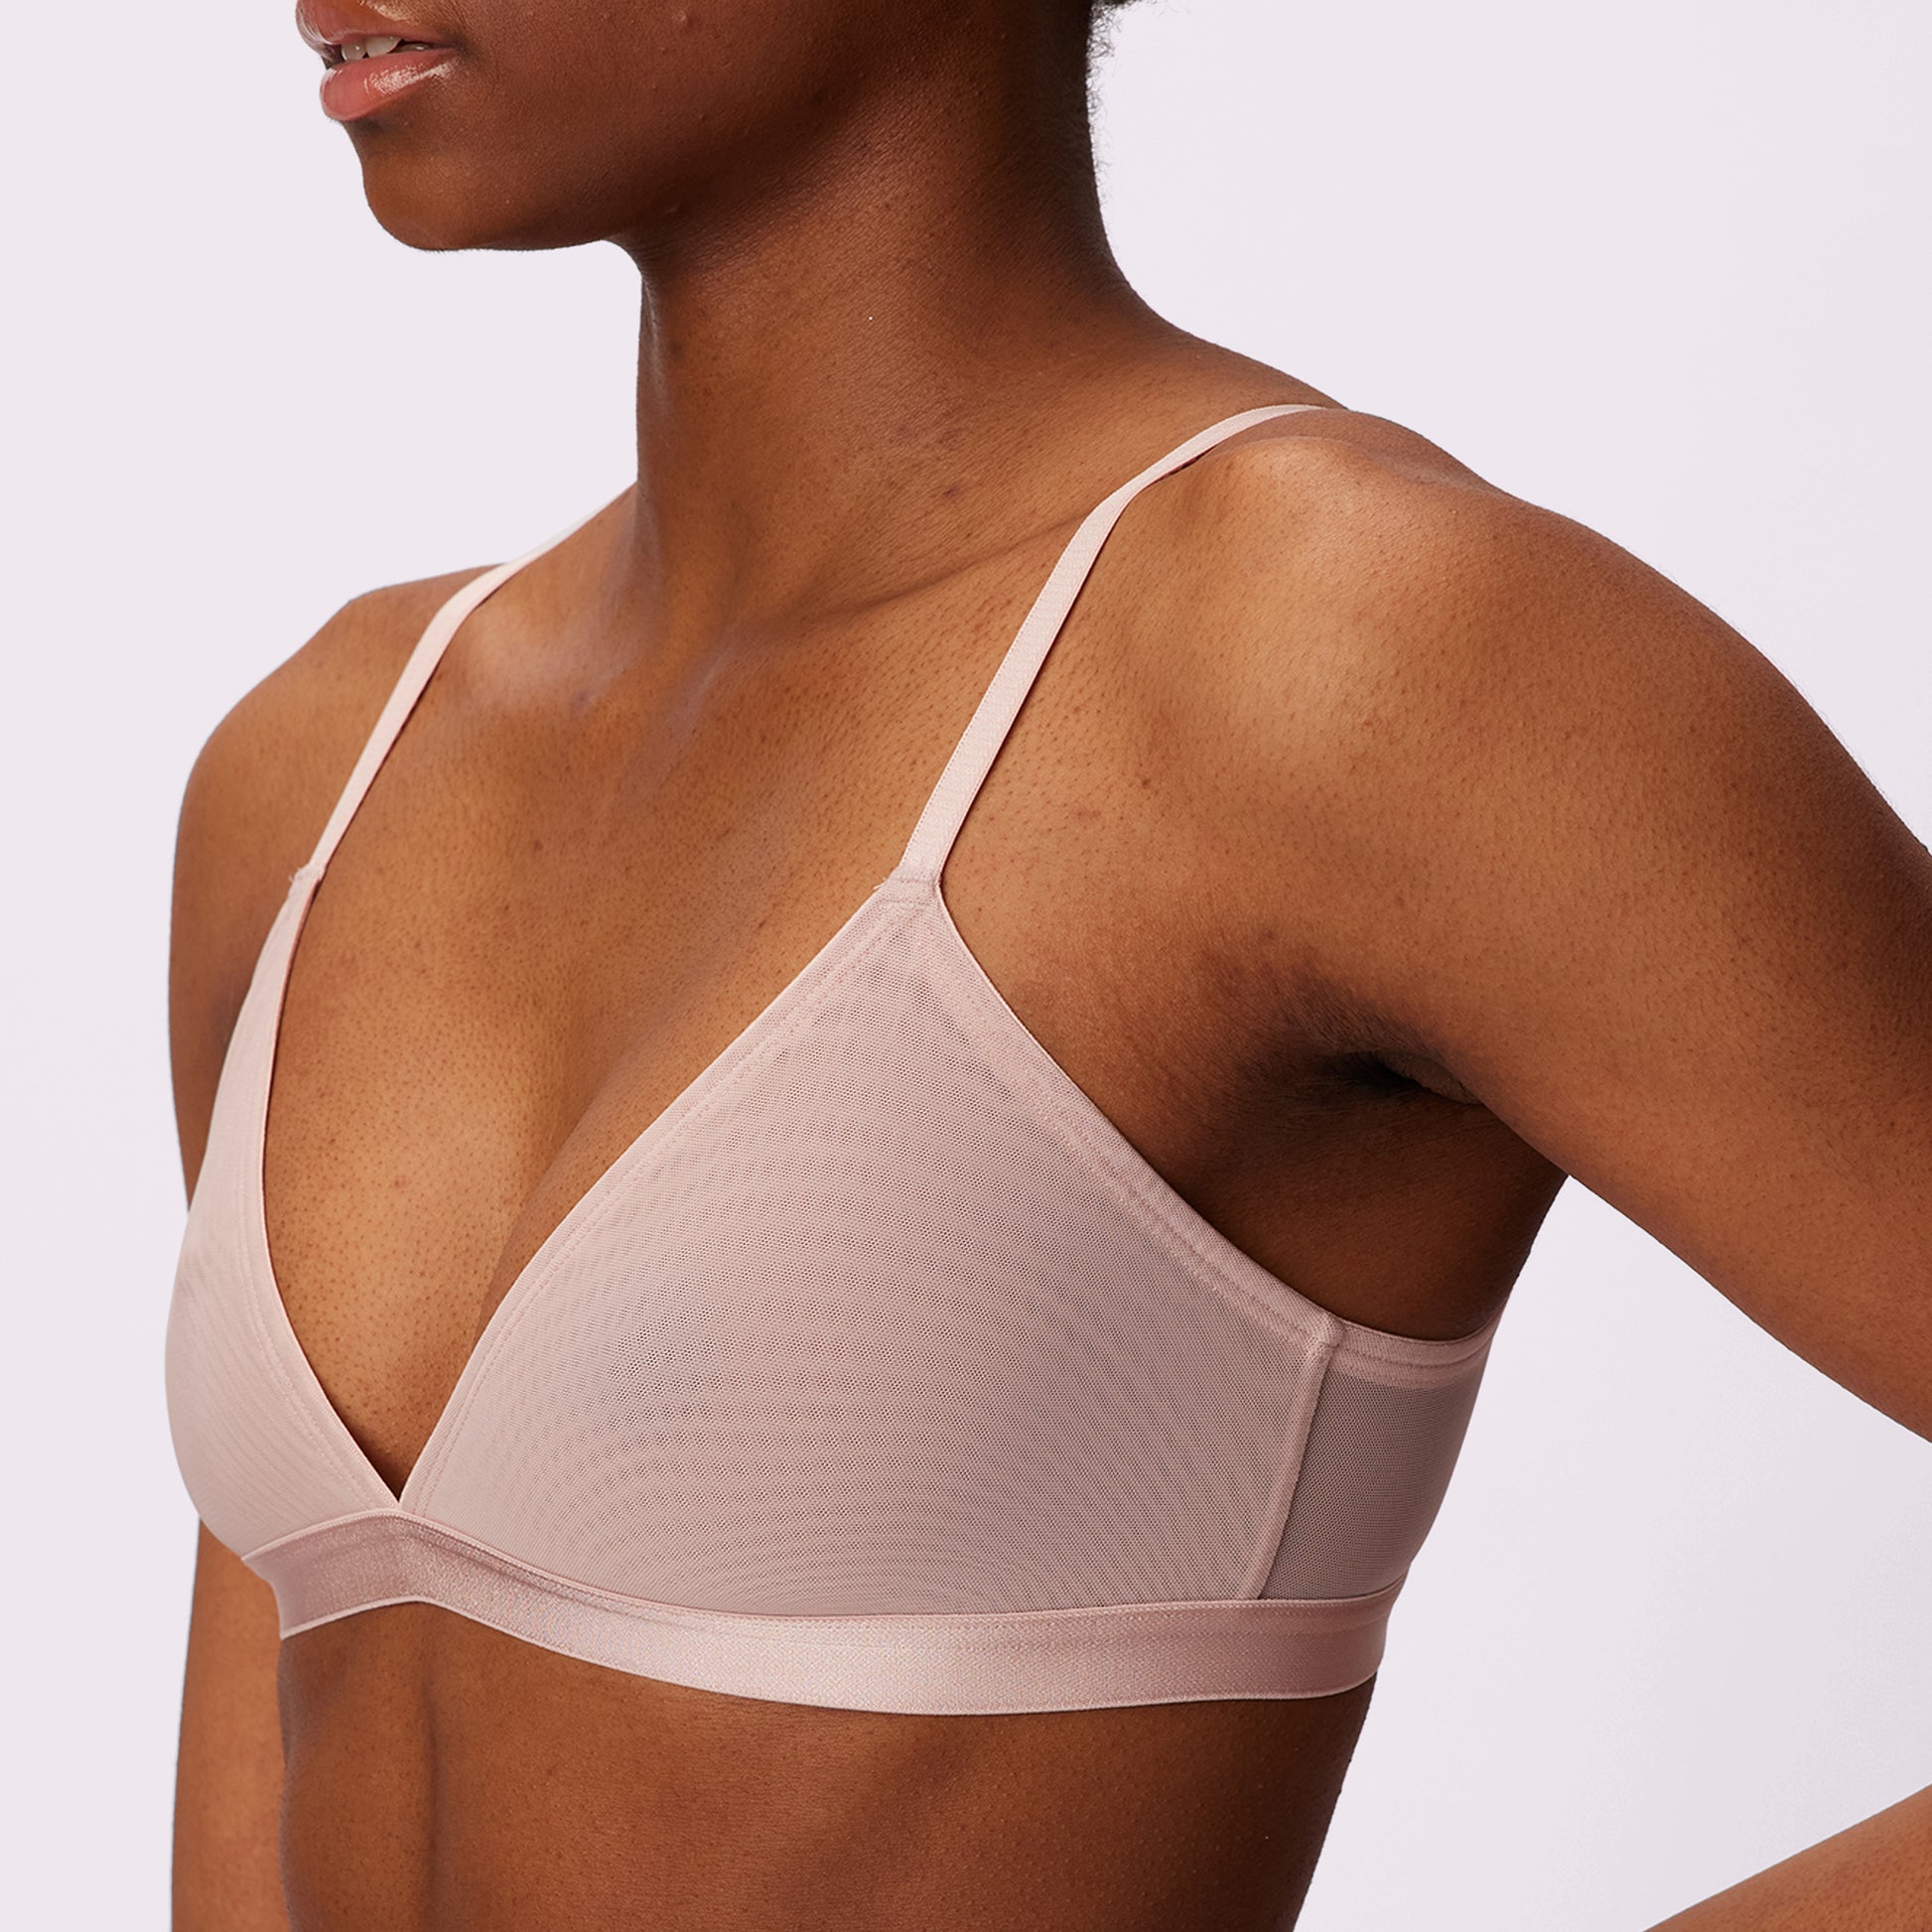 Parade + Luxe Mesh Triangle Bralette